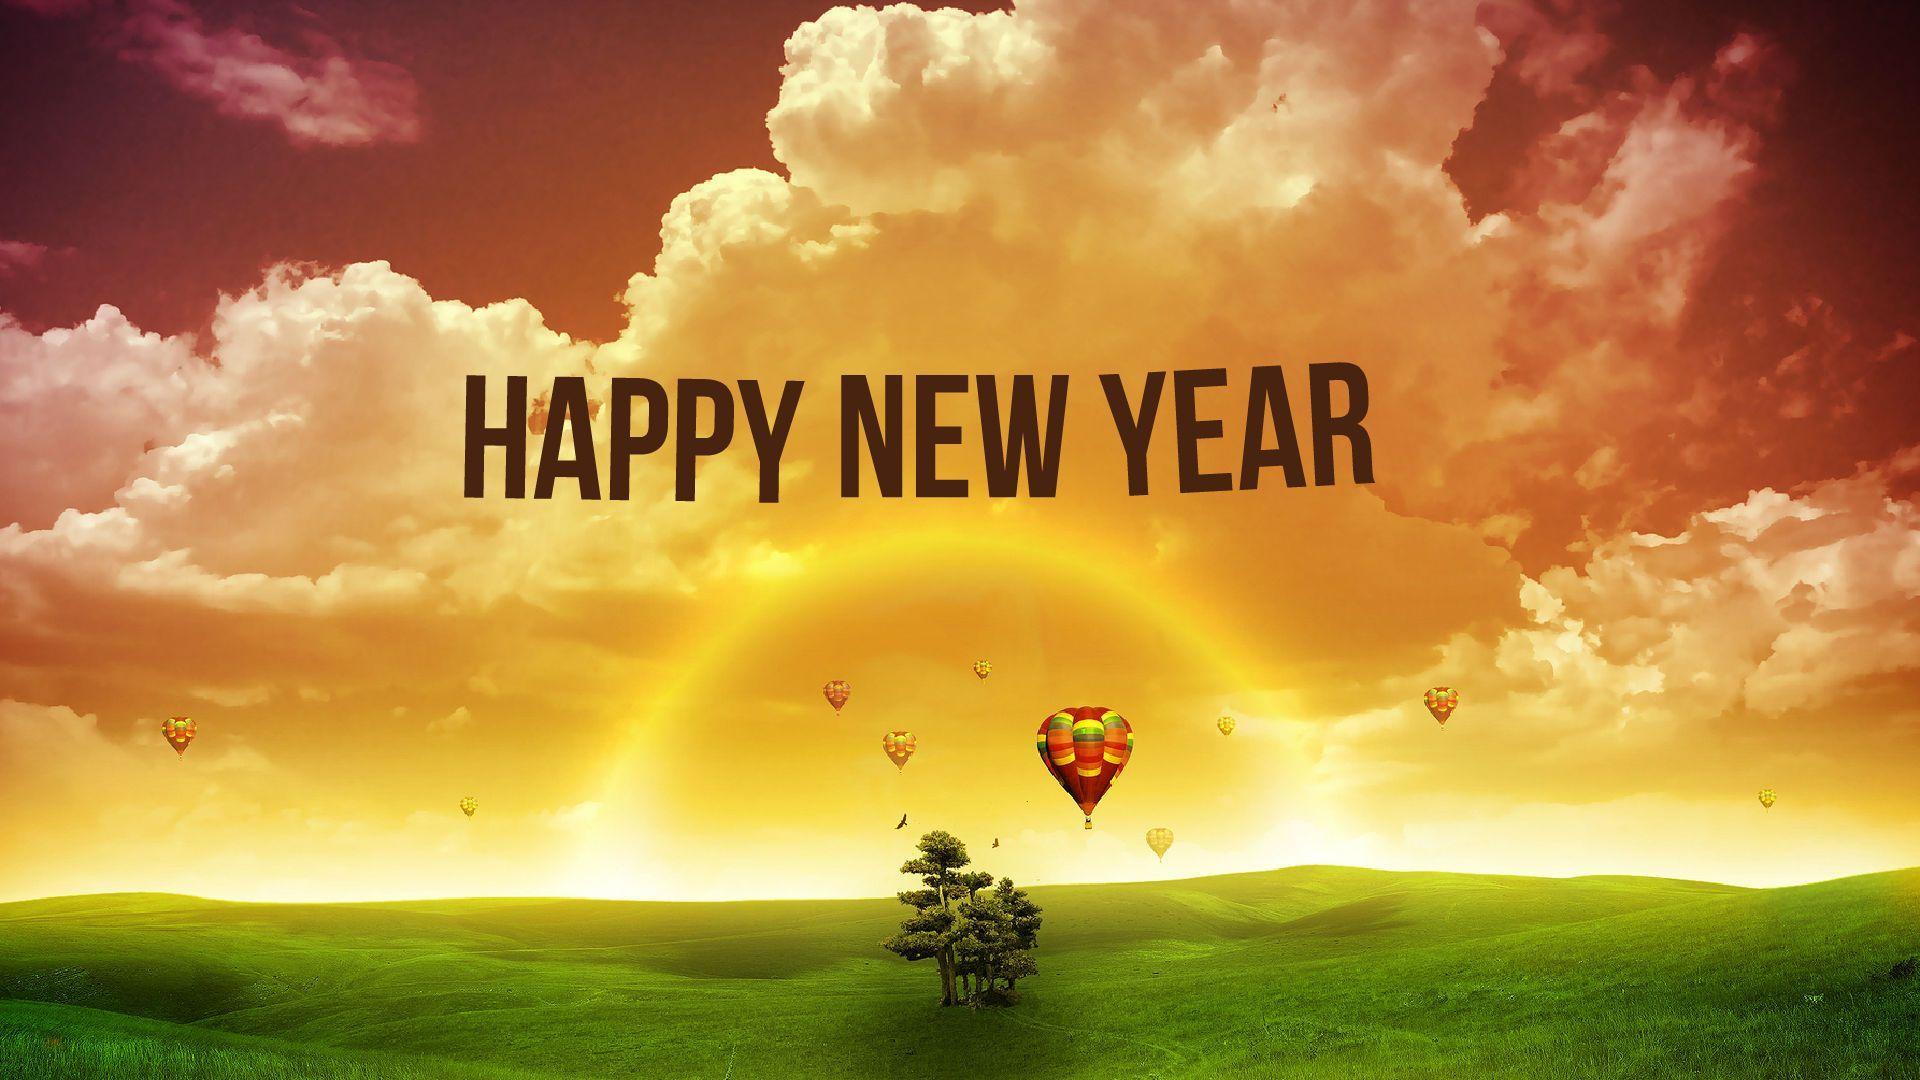 Happy new year 2016 HD wallpaper Image Picture